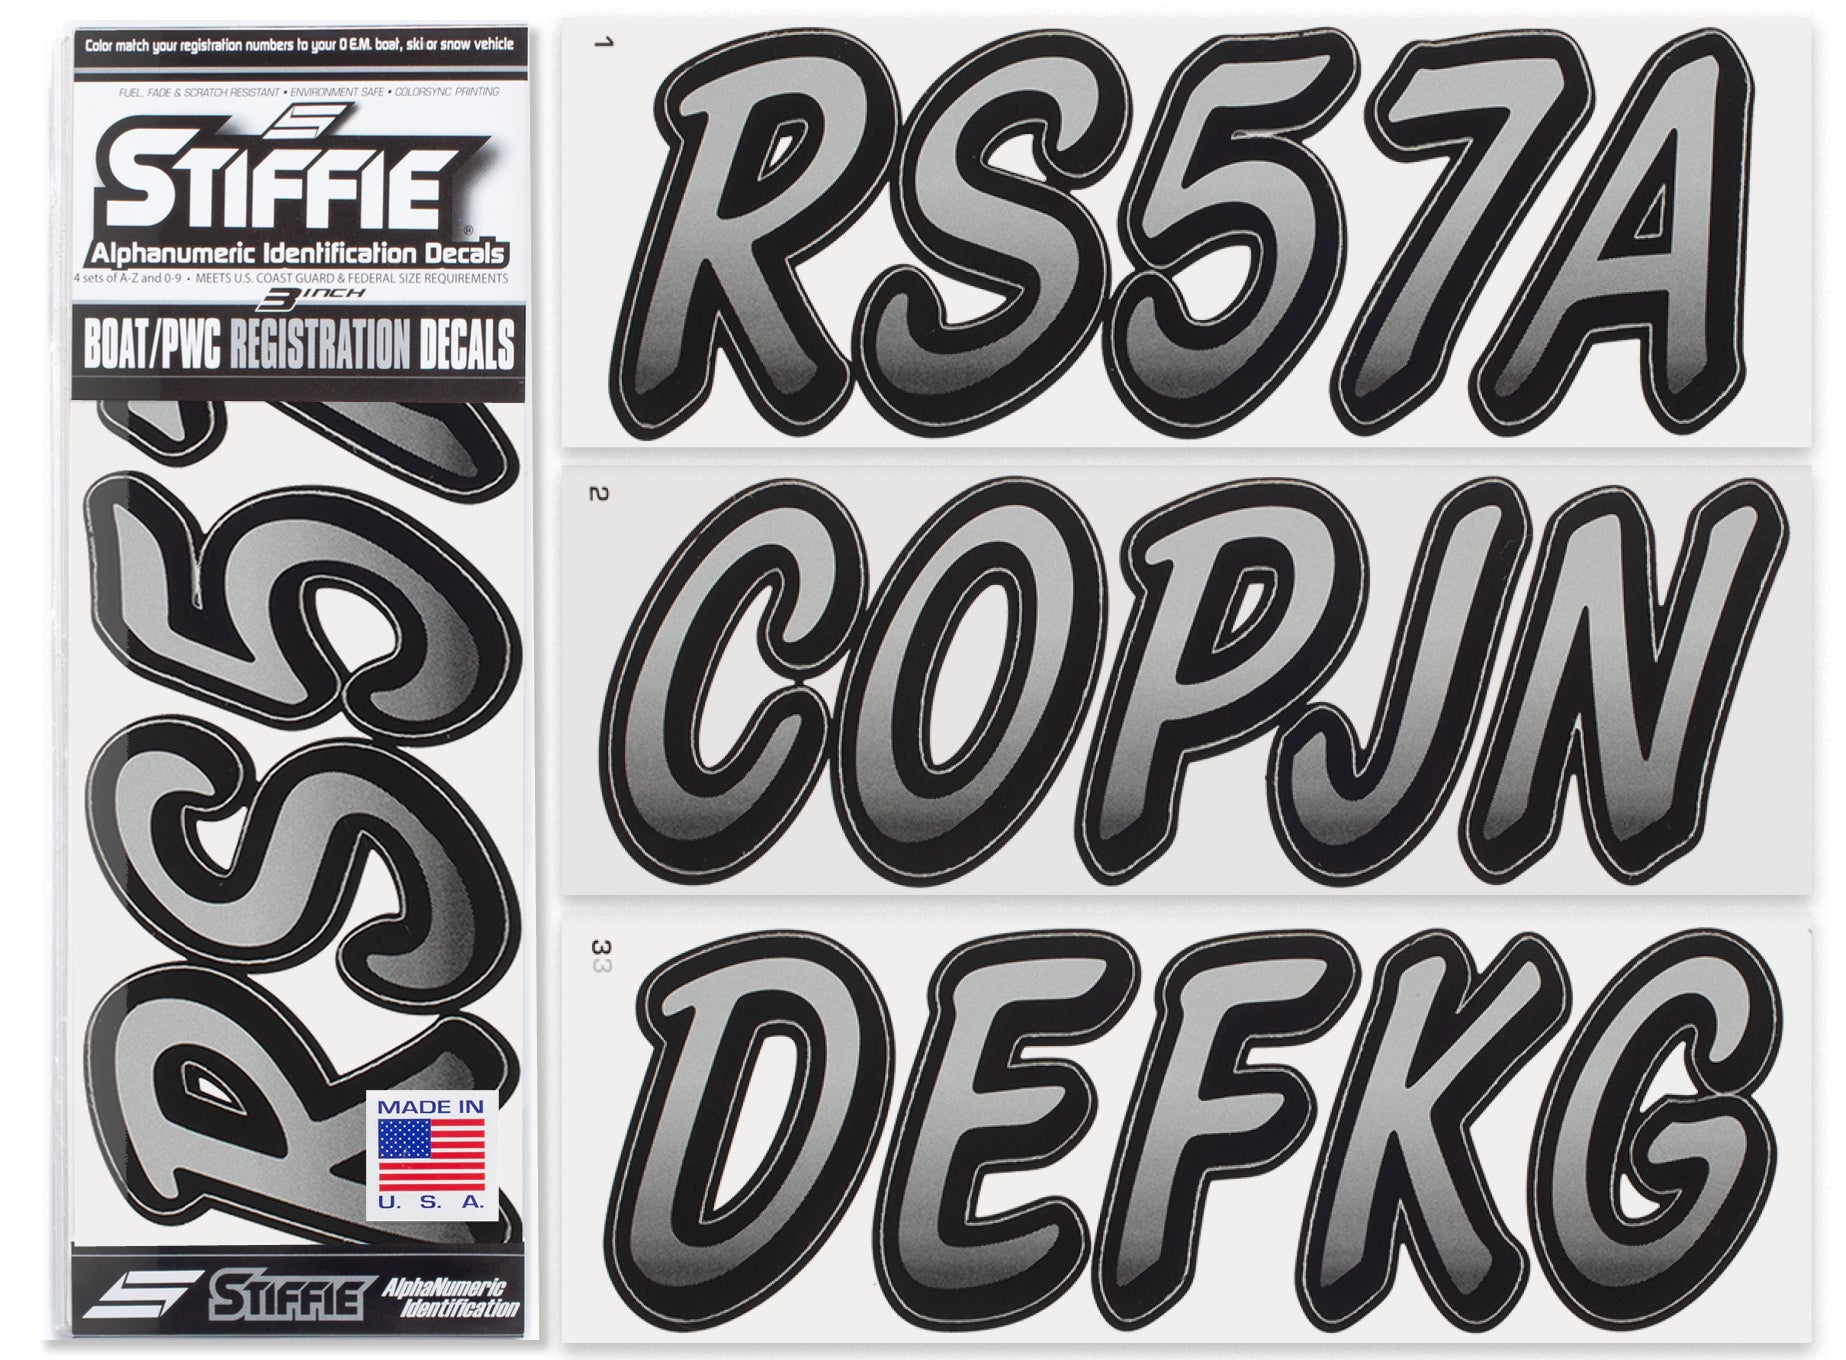 Stiffie Whipline Silver/Black 3" Alpha-Numeric Registration Identification Numbers Stickers Decals for Boats & Personal Watercraft